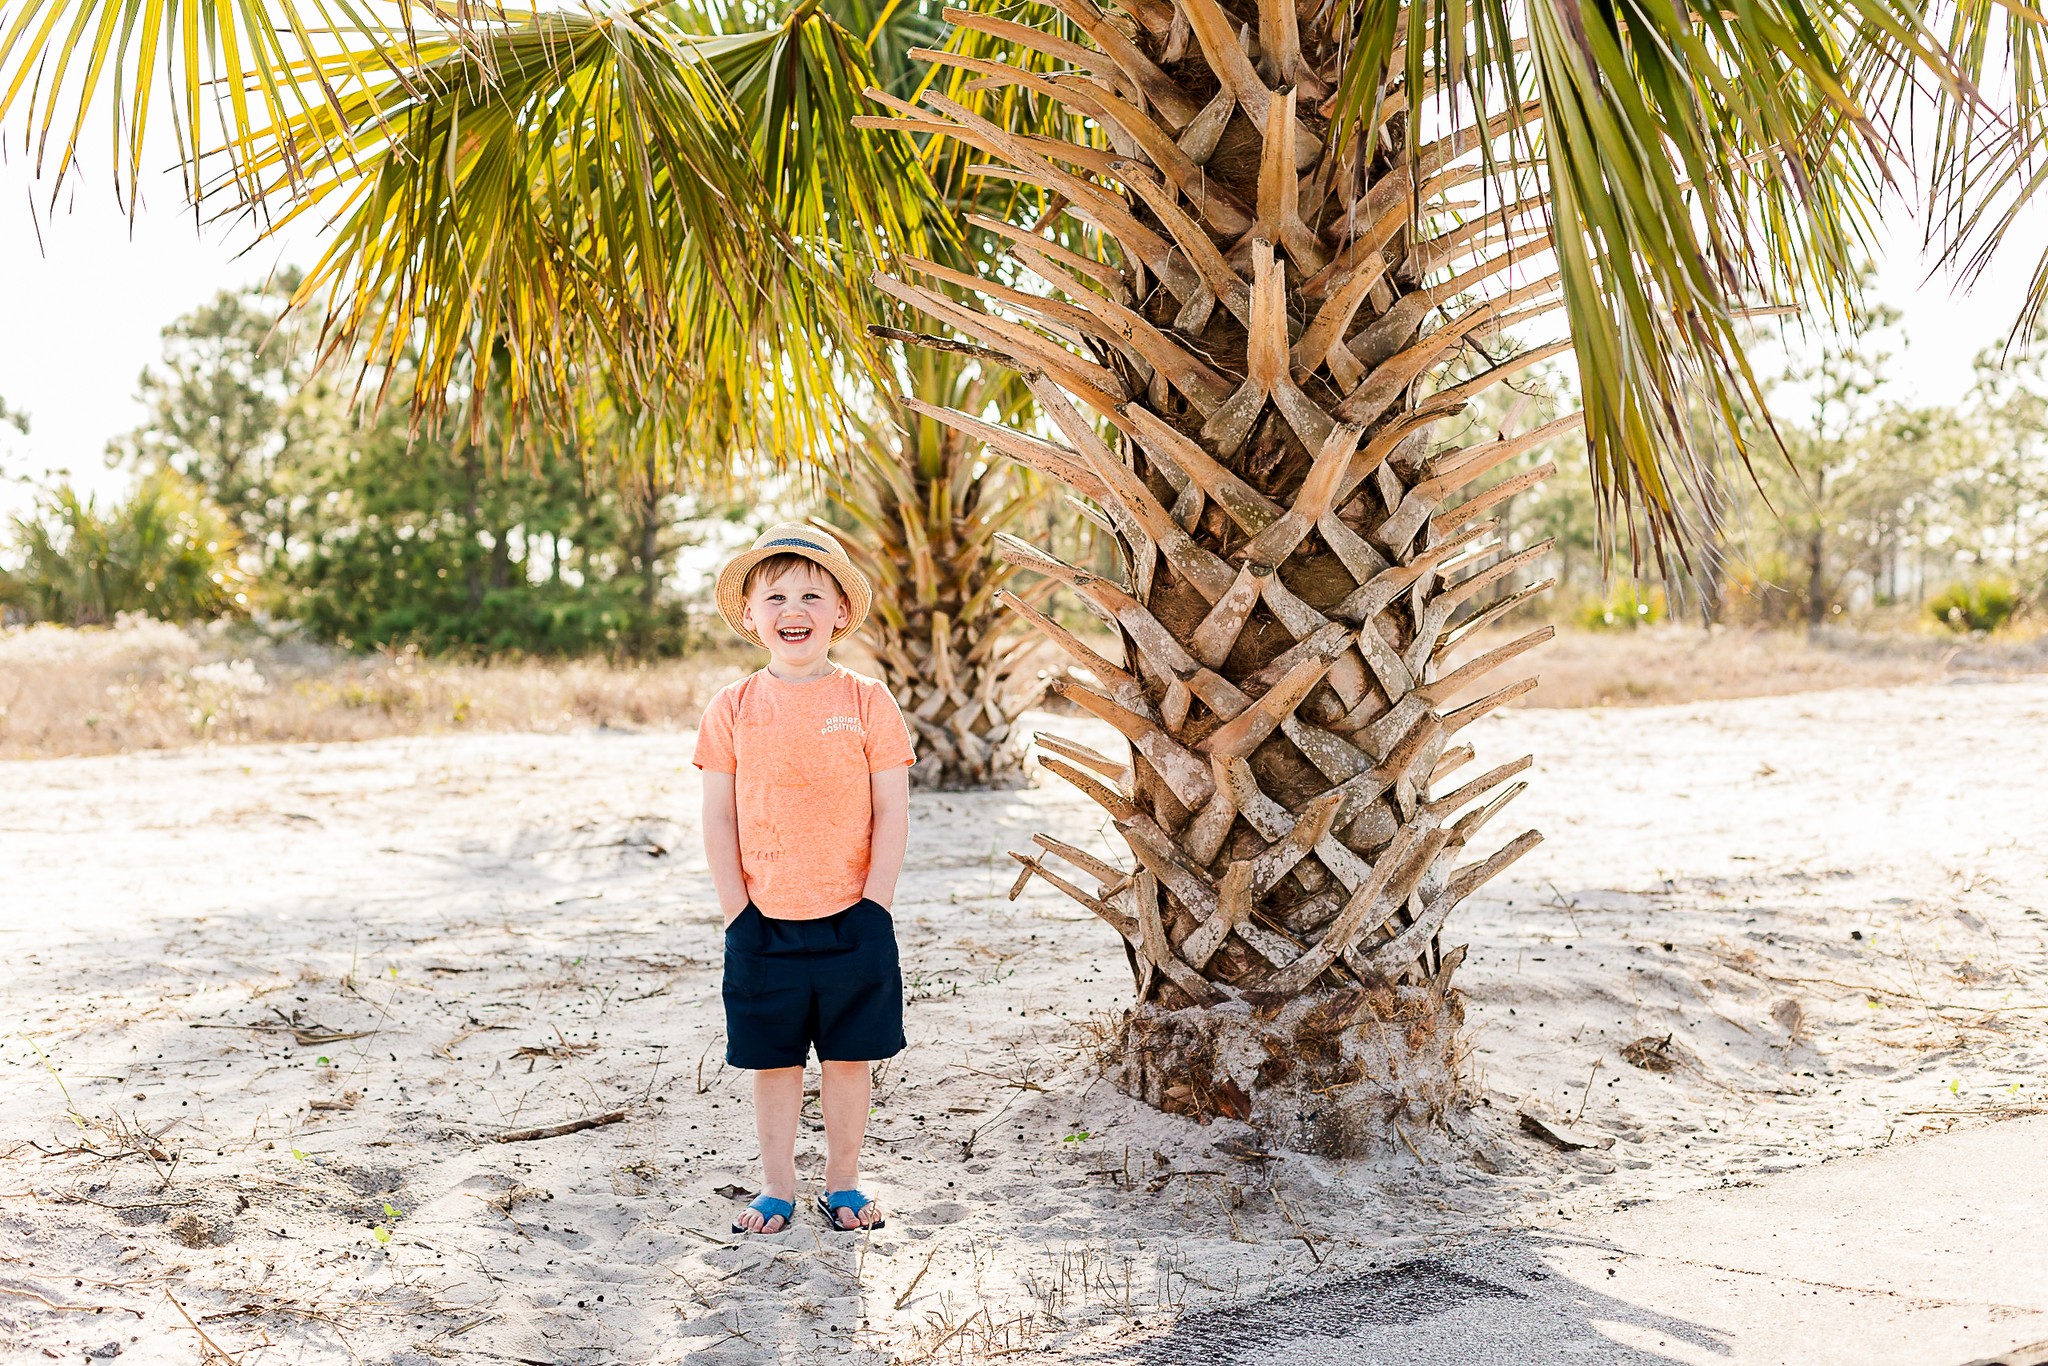 young boy, standing in the sand next to a palm tree, smiling